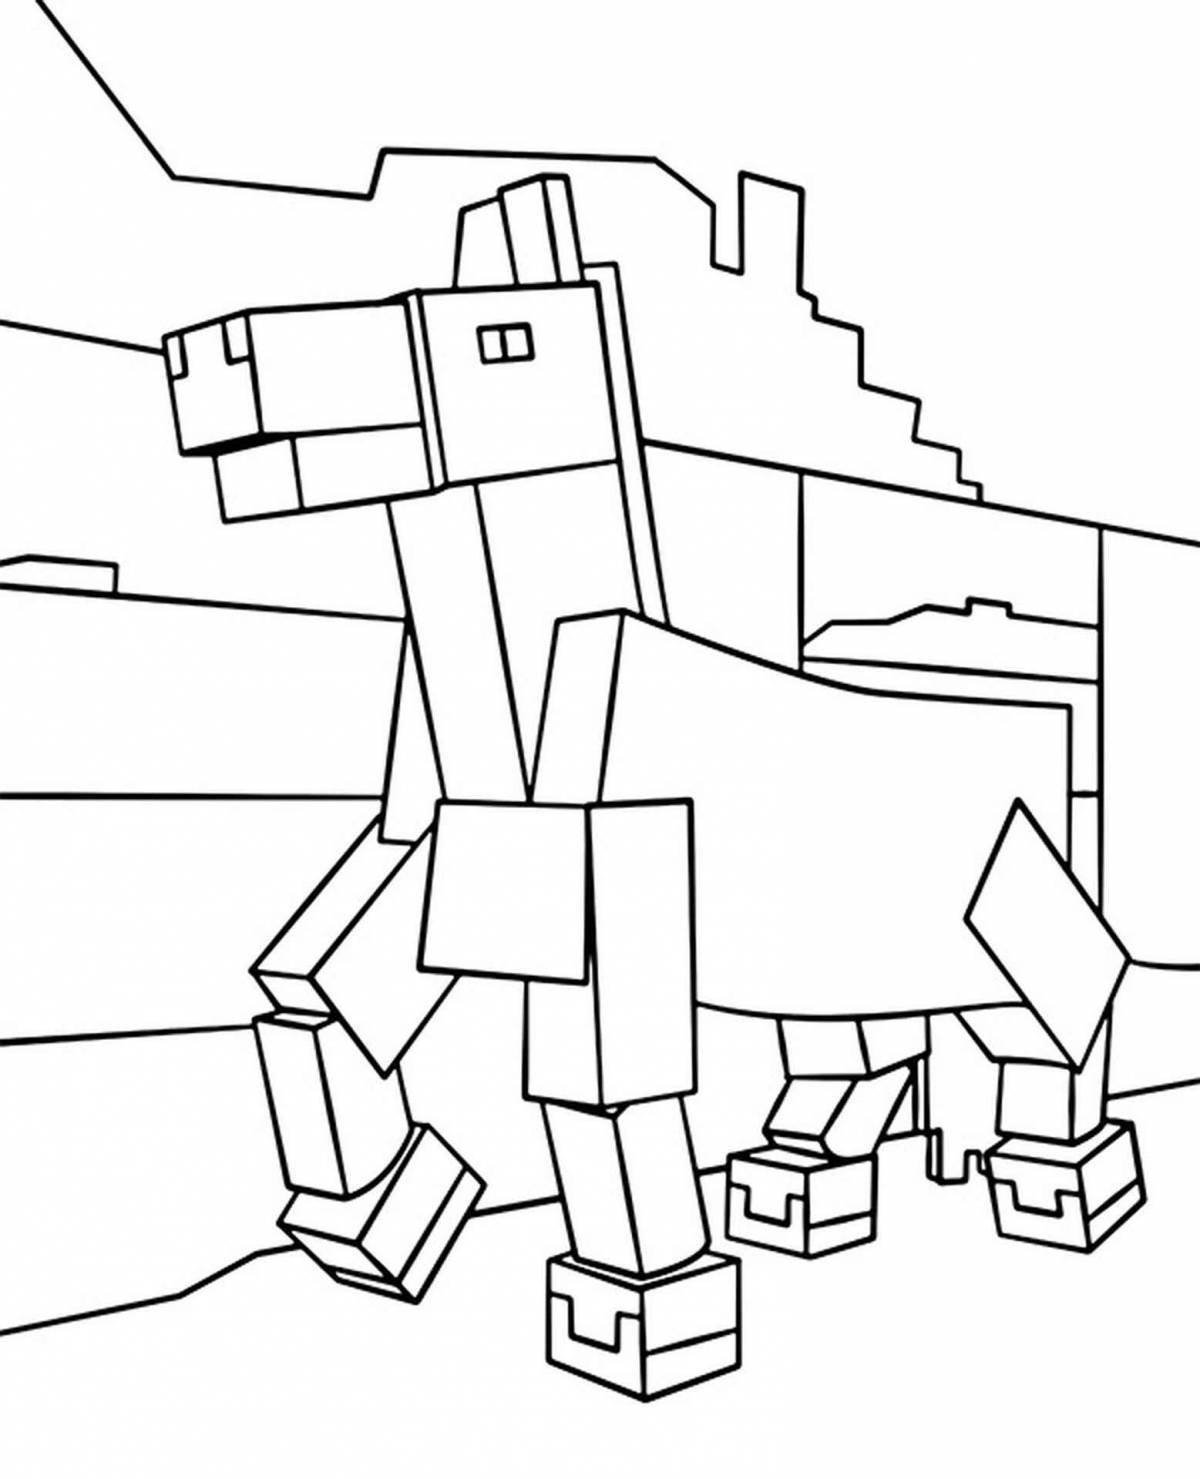 Detailed minecraft horse coloring page